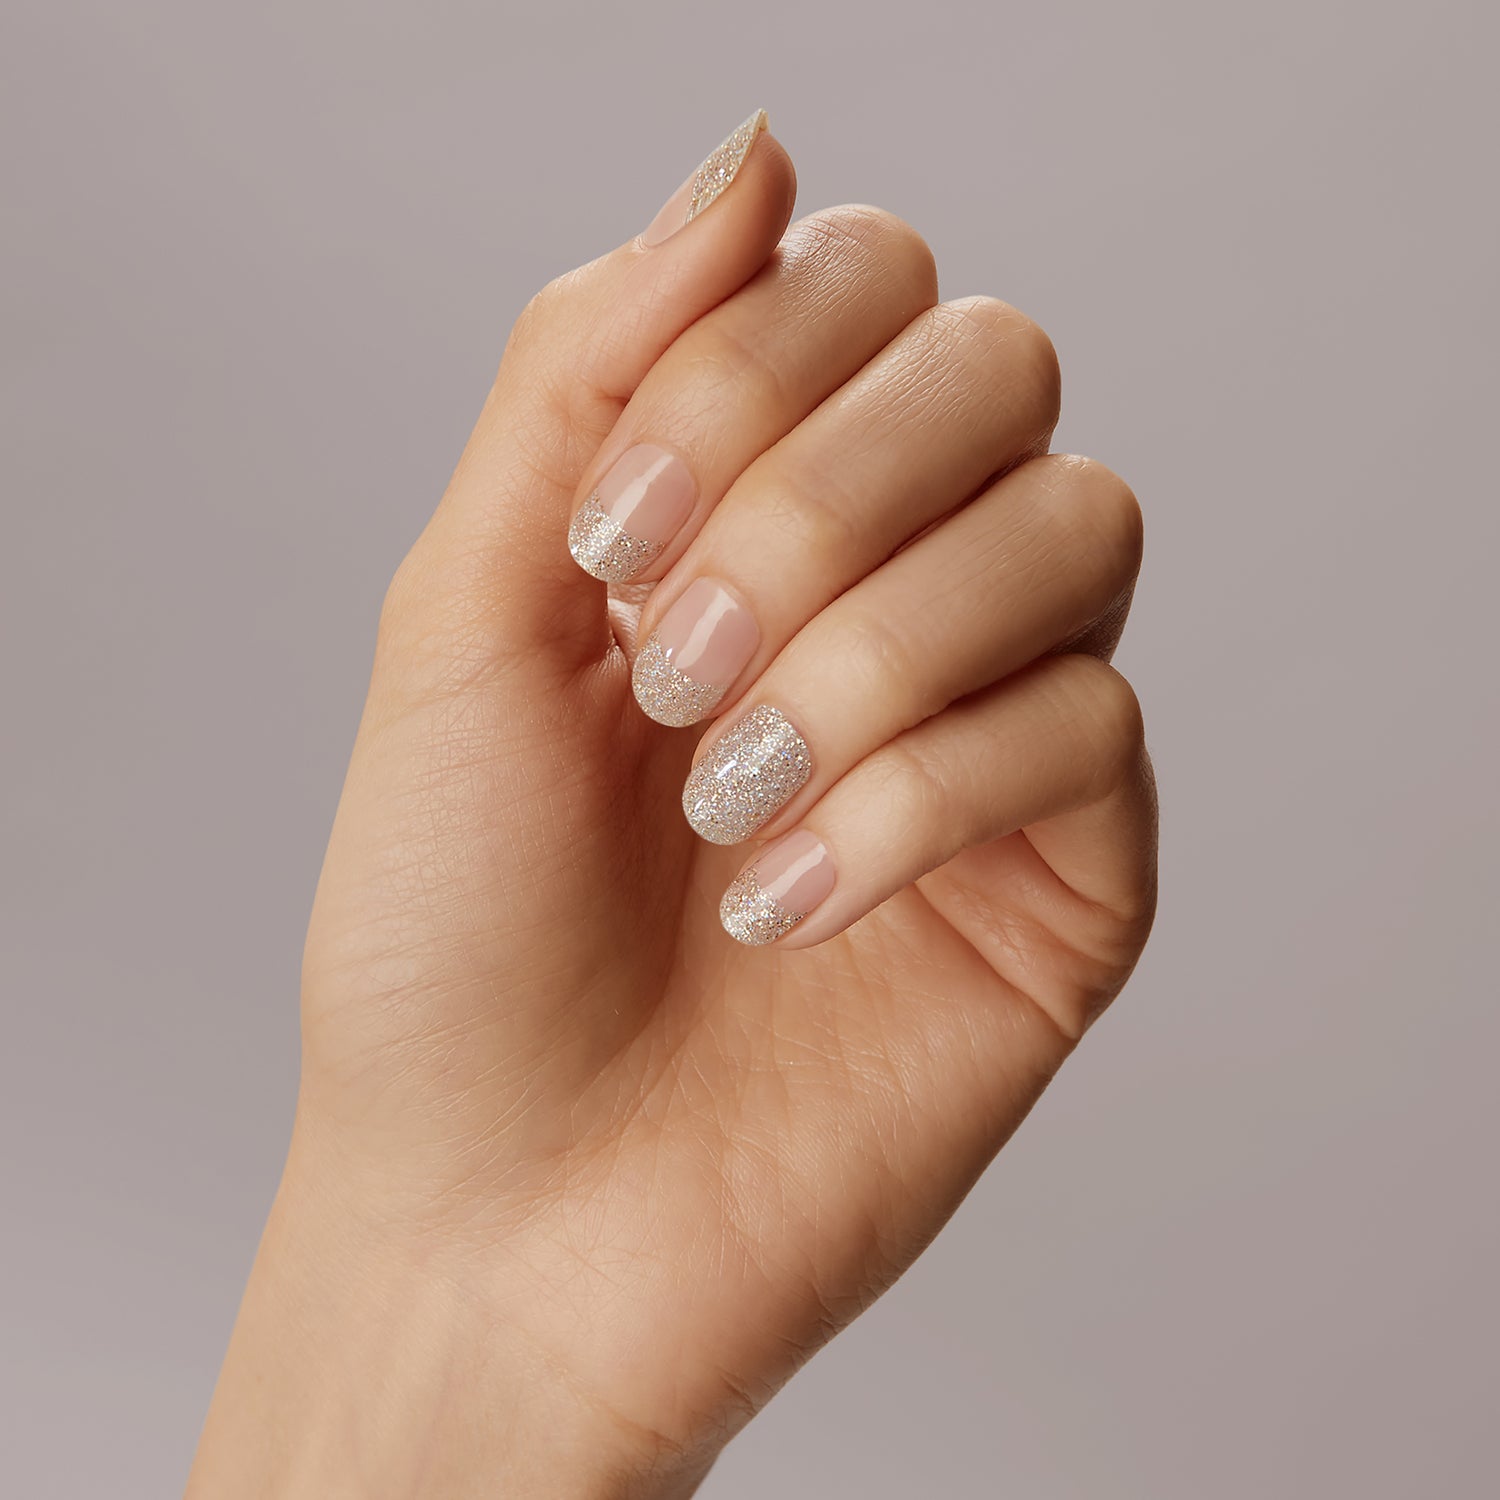 Sheer beige gel nail strips featuring iridescent champagne glitter and glittered french tips with a double gel formula with an ultra-smooth finish.